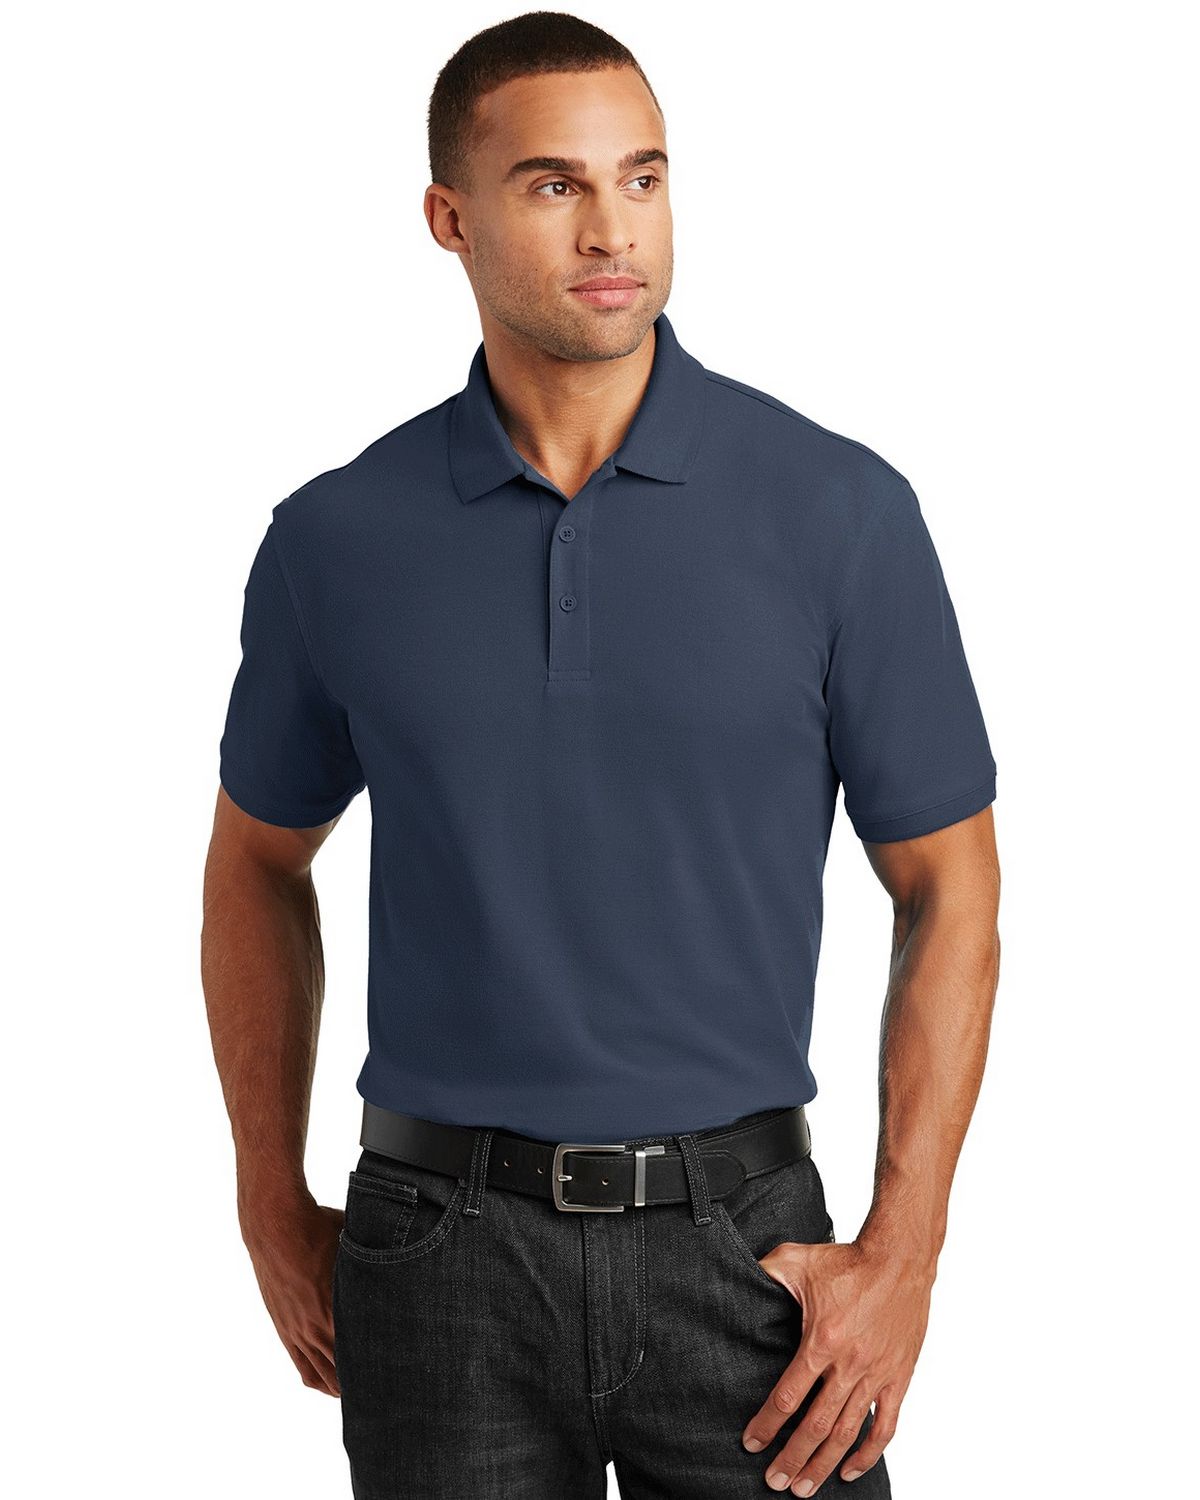 Port Authority TLK100 Tall Core Classic Pique Polo